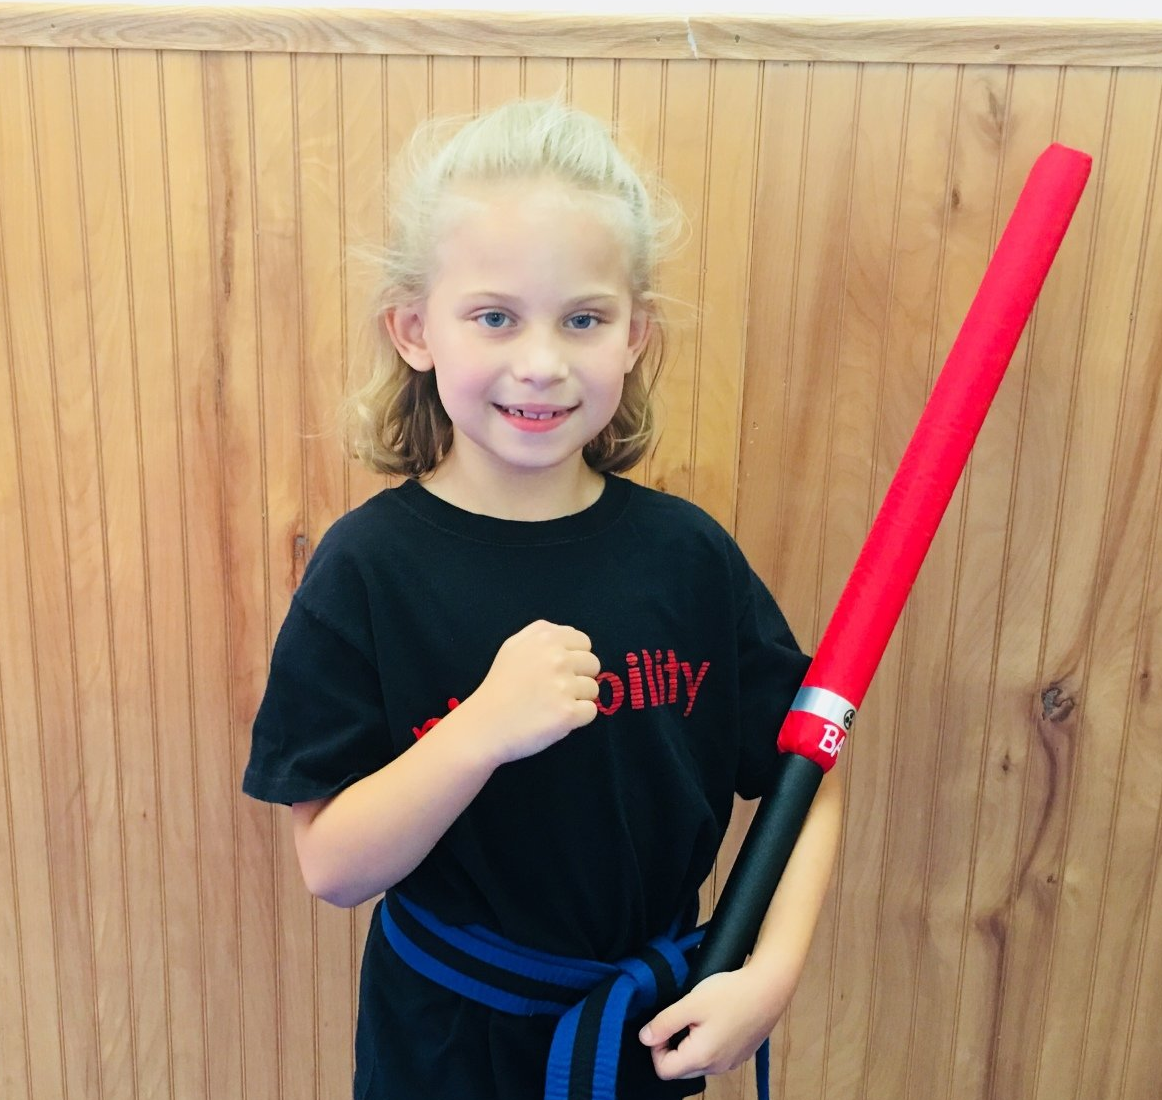 Ninja Classes Pittsburgh 7 and 8 Year olds